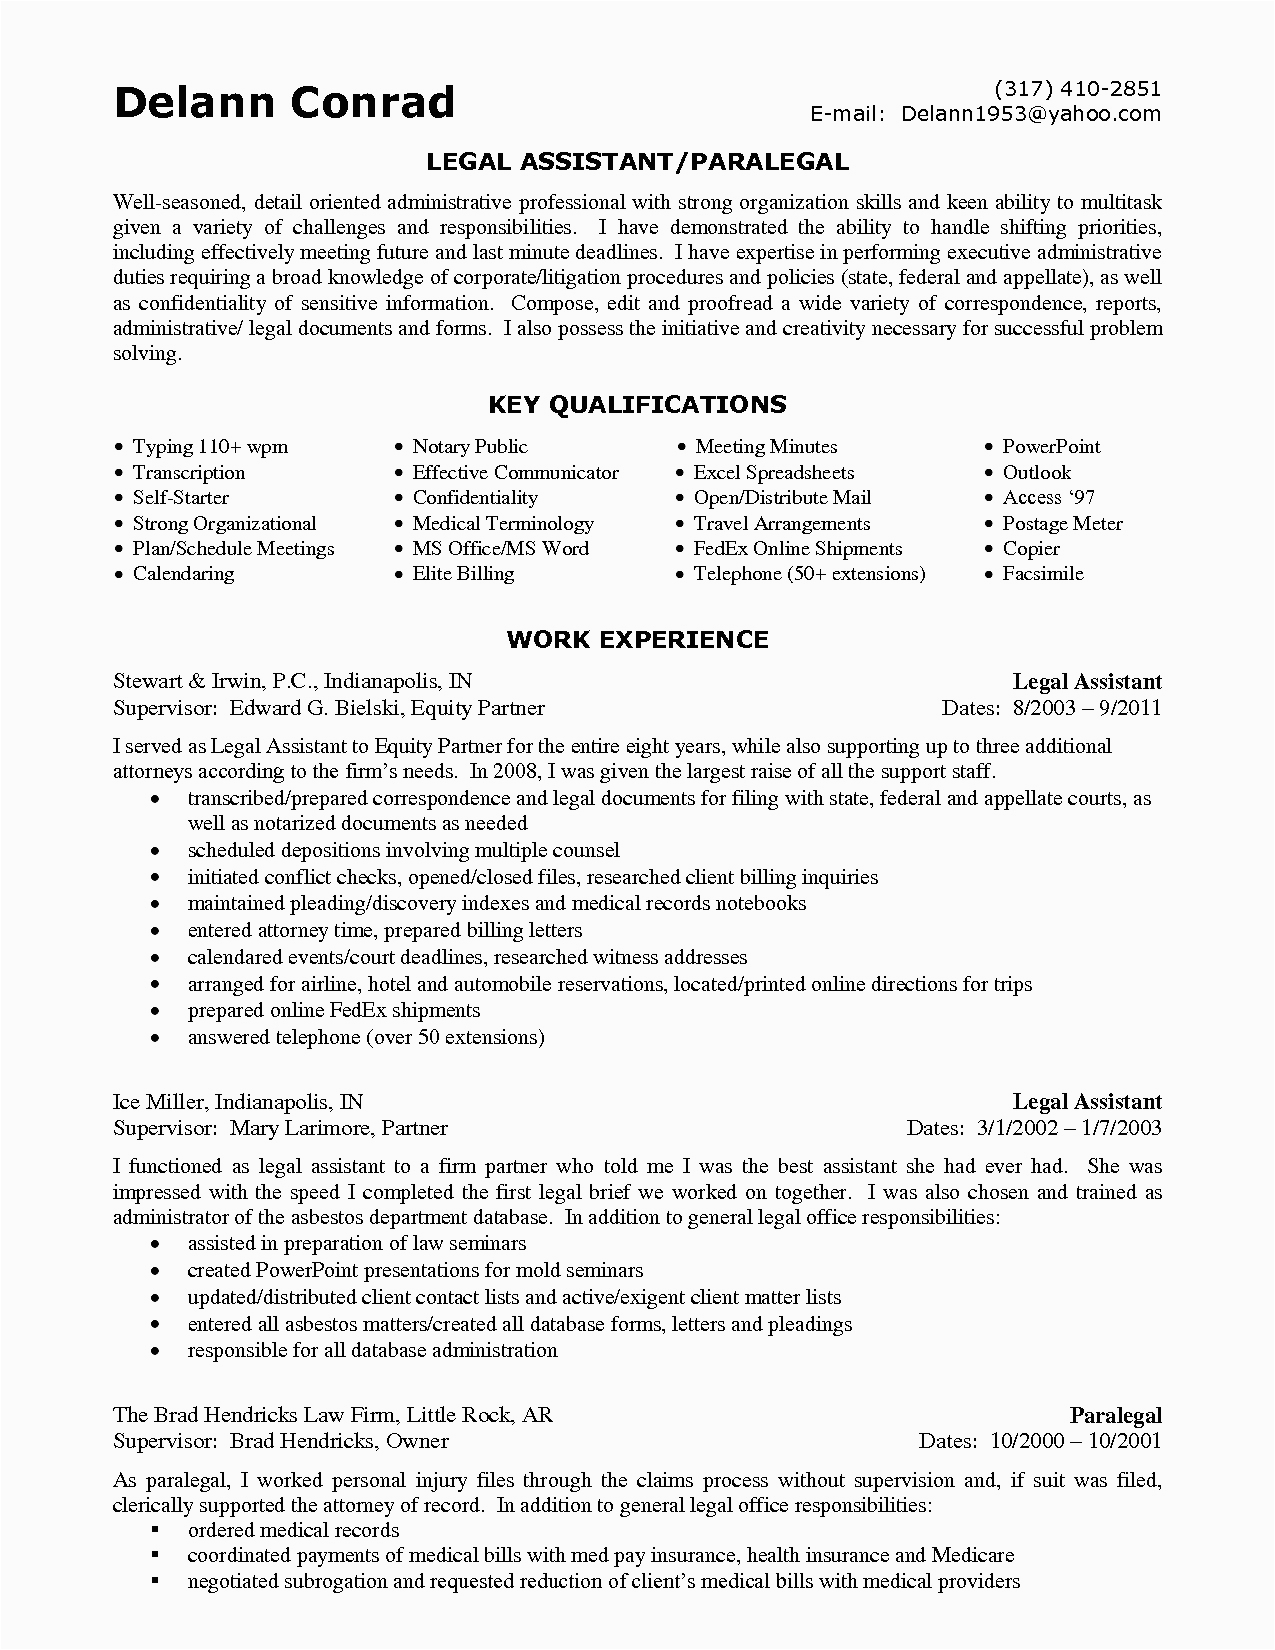 Sample Resume for Personal Injury Legal assistant Entry Level Legal assistant Resume